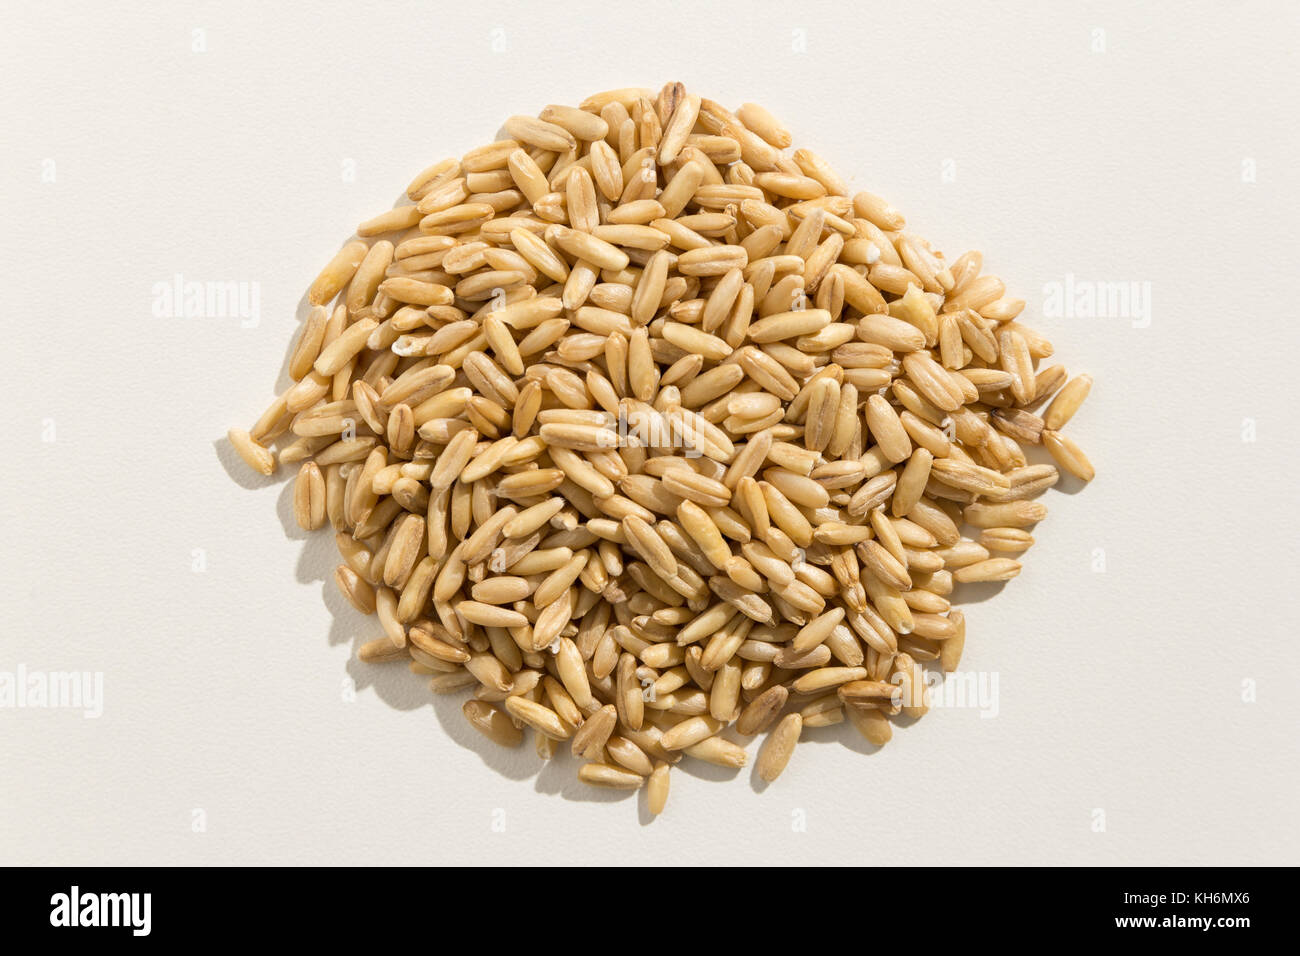 Avena Sativa is scientific name of Oat cereal grain. Also known as Aveia or Avena. Pile of grains. Top view. Stock Photo